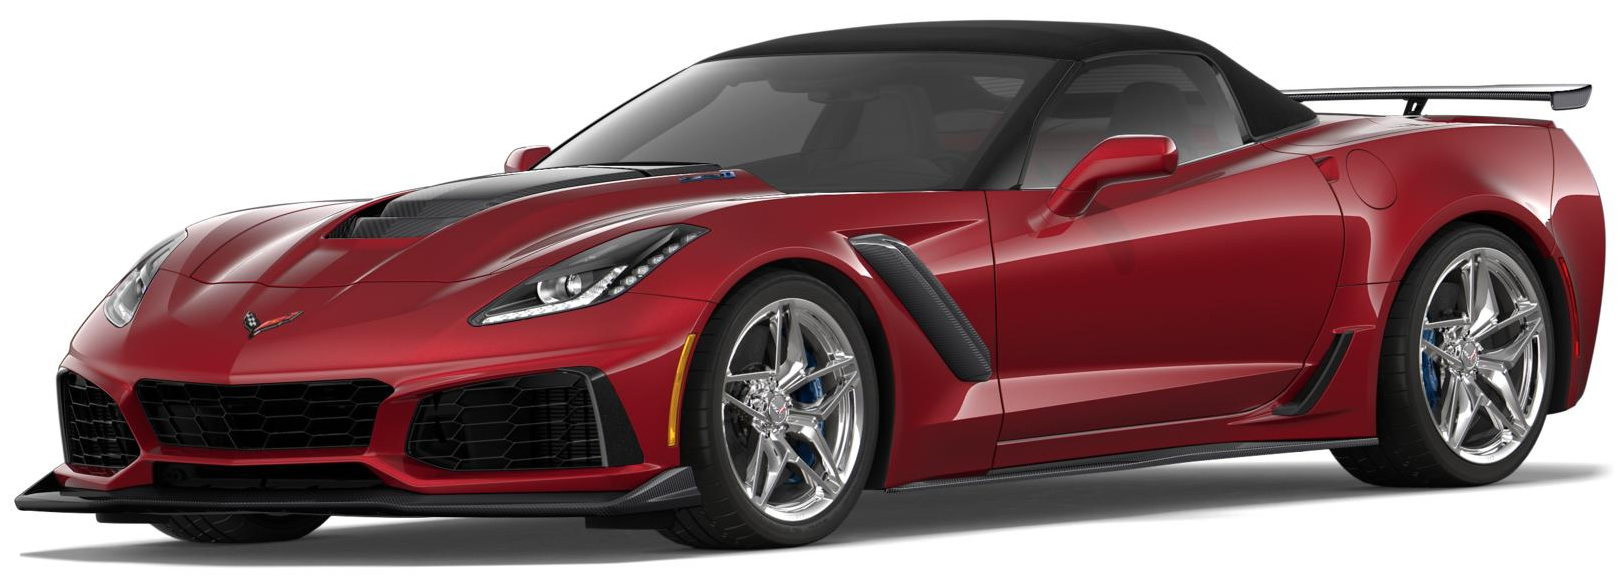 2019 Corvette ZR1 Convertible in Long Beach Red Metallic with Chrome Wheels